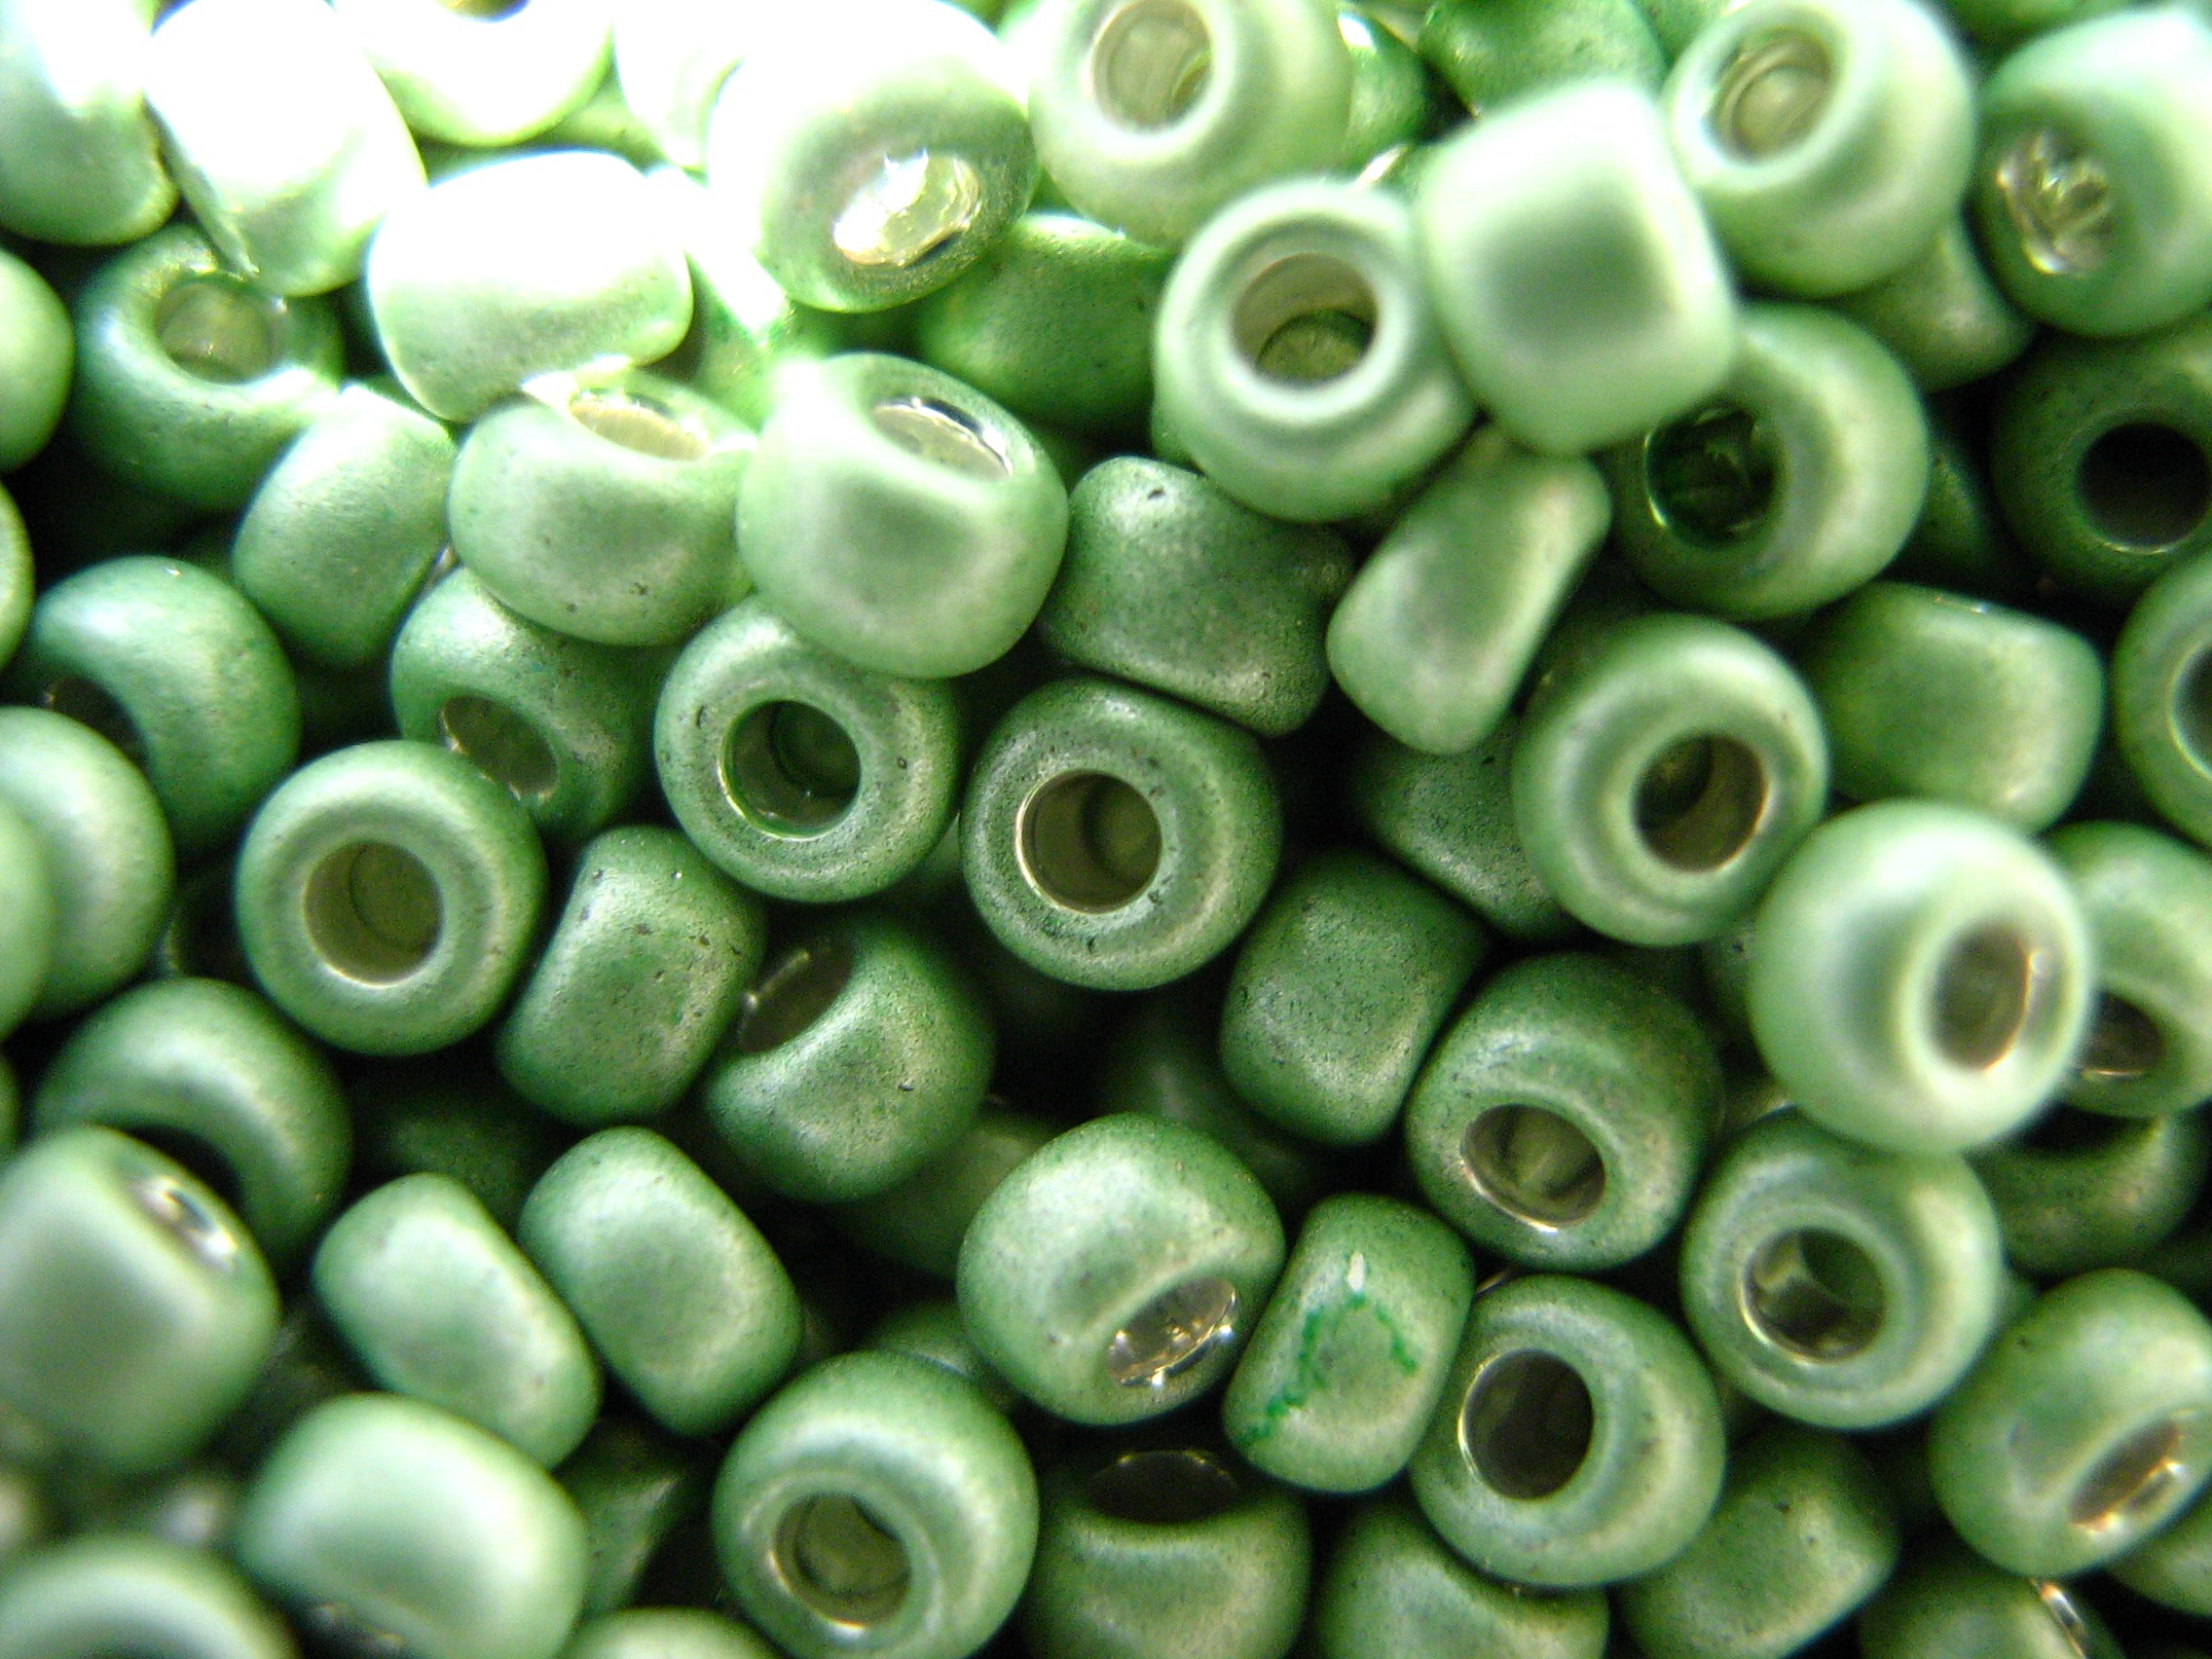 Toho RE:Glass Seed Beads, Round Size 11/0, #5105 Luster Green